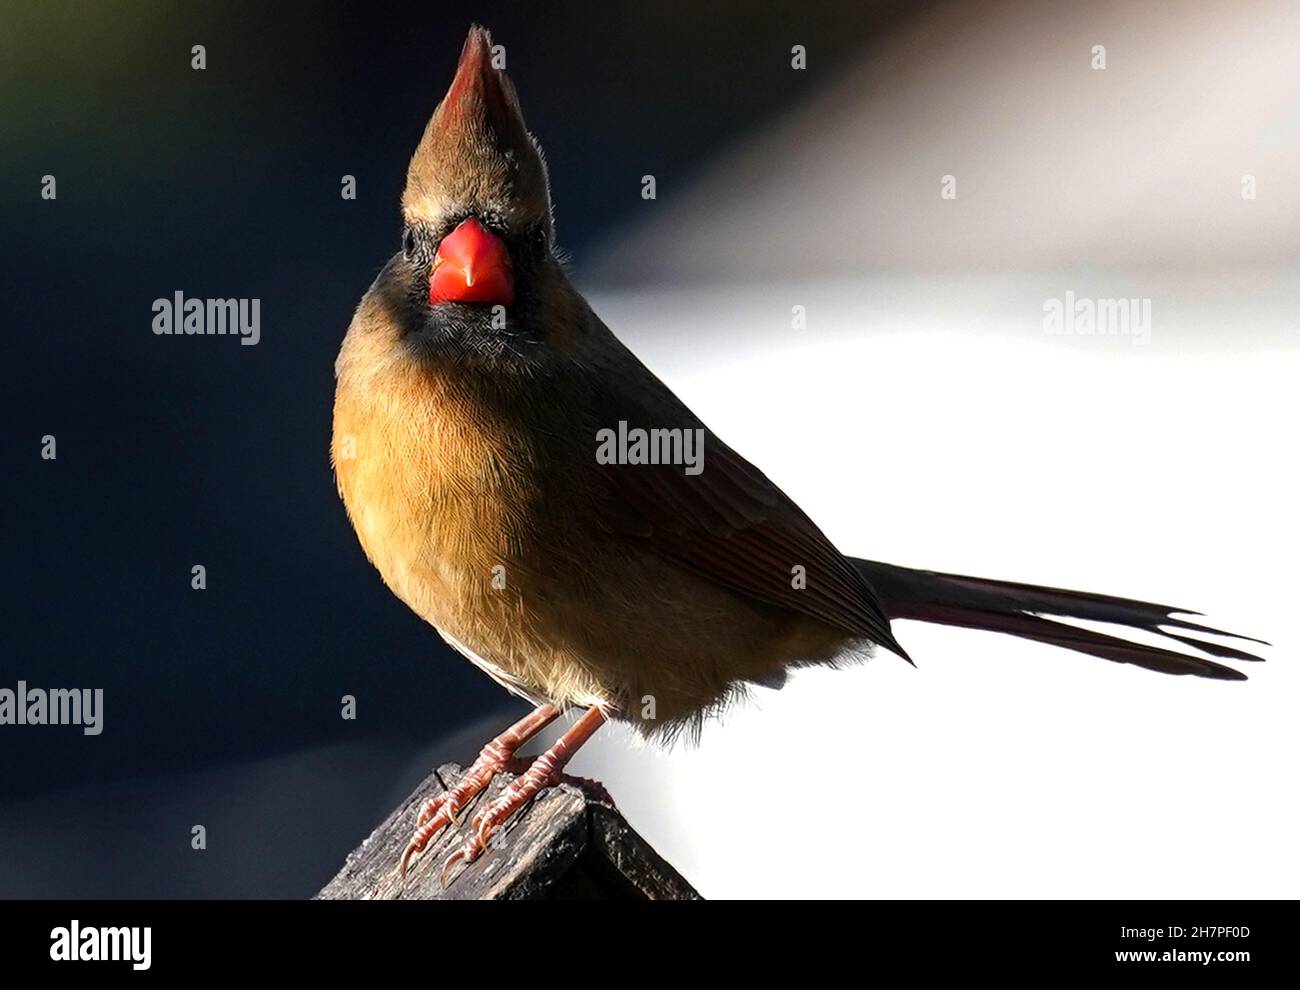 Female Northern Cardinal on the roof of a bird house Stock Photo